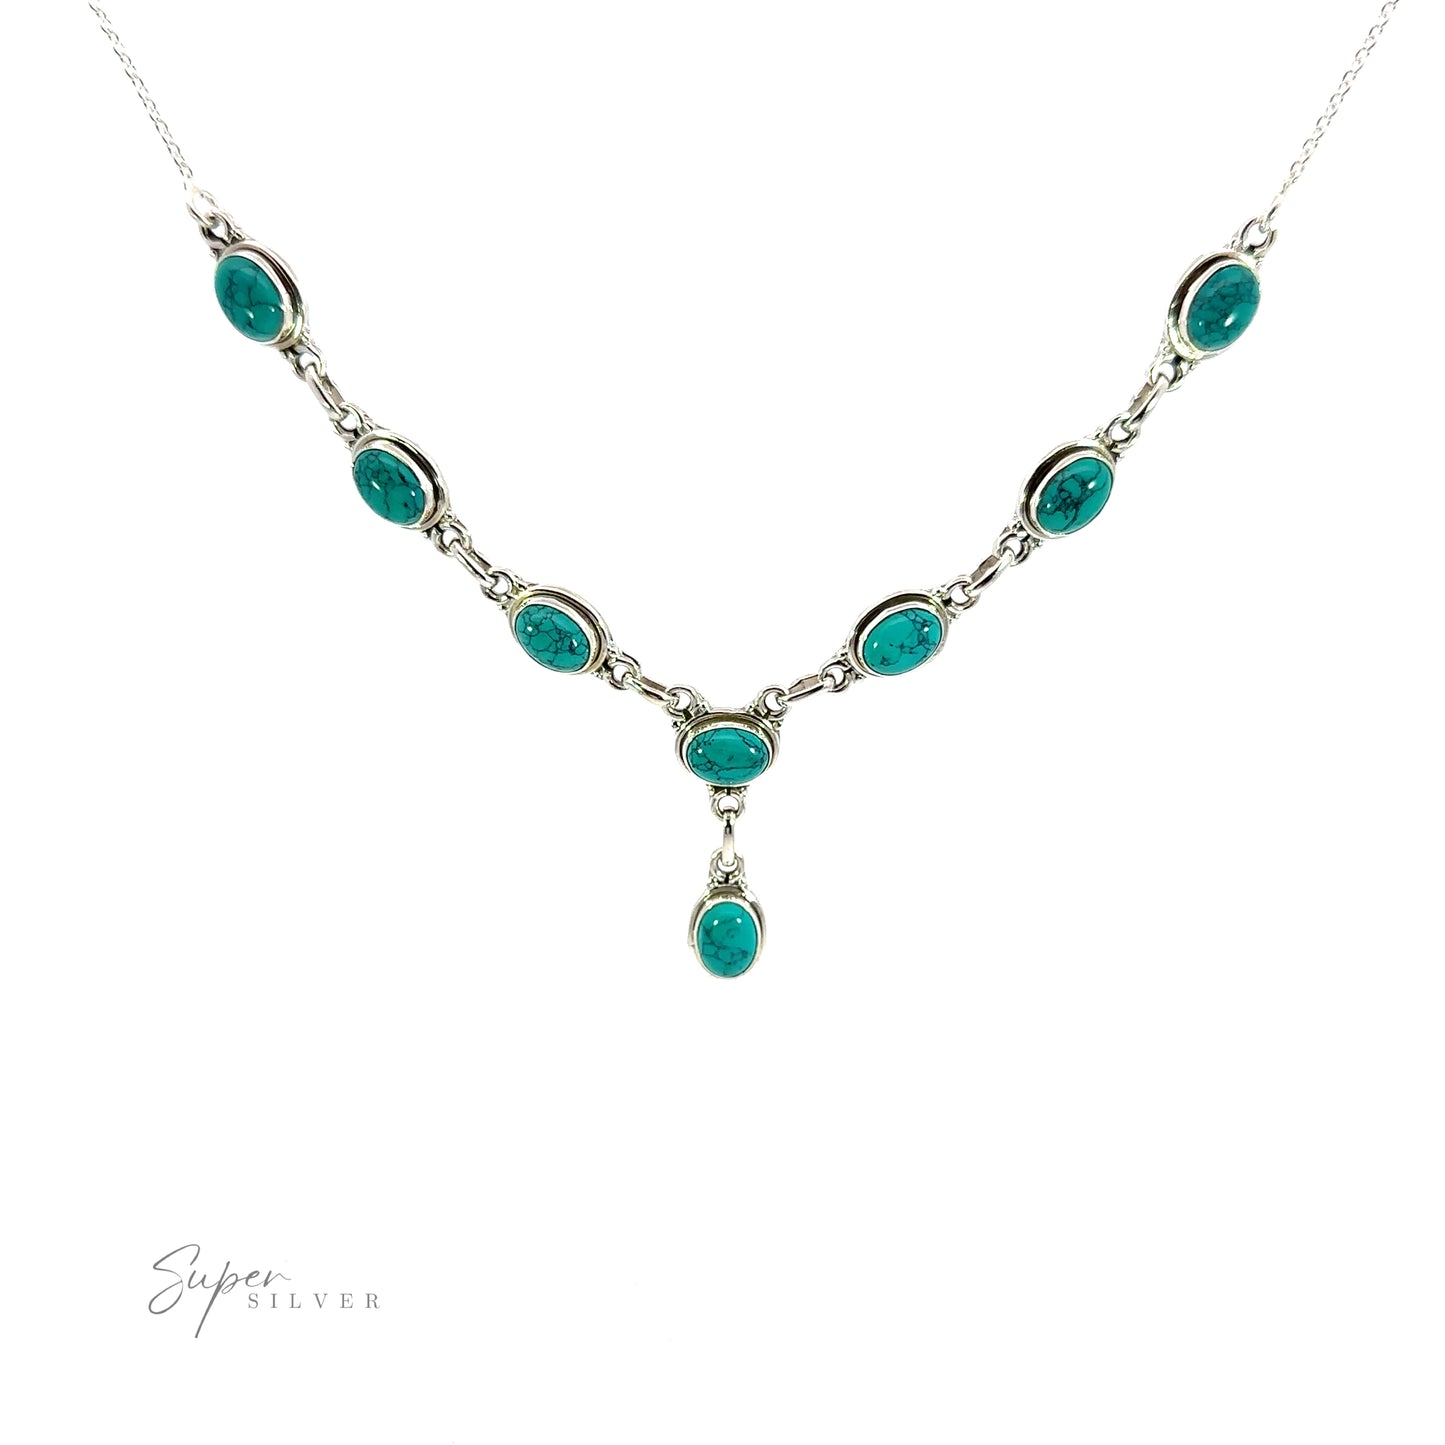 
                  
                    A Simple Oval Y Necklace with Gemstones featuring multiple green oval gemstones arranged in a symmetrical pattern, with one hanging stone in the center. The words "Super Silver" are present in the bottom left corner, adding a touch of bohemian charm.
                  
                